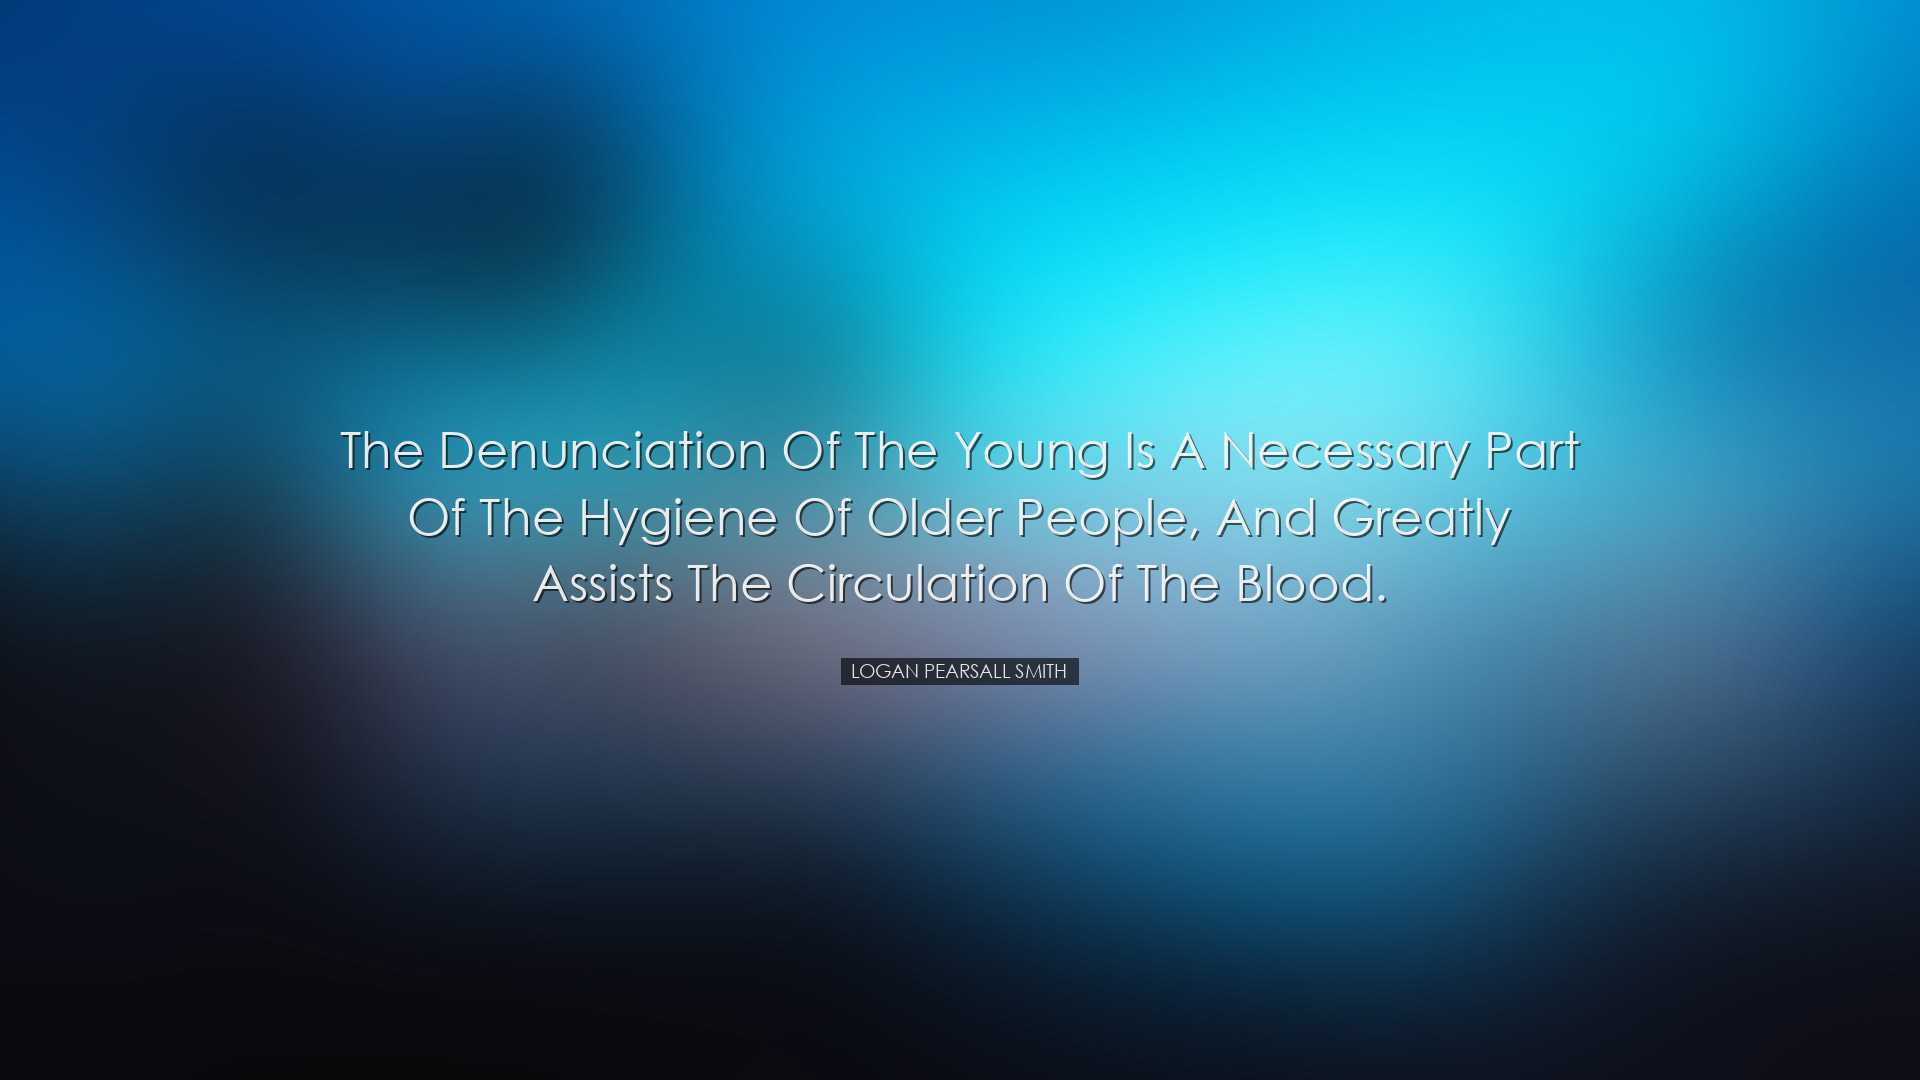 The denunciation of the young is a necessary part of the hygiene o